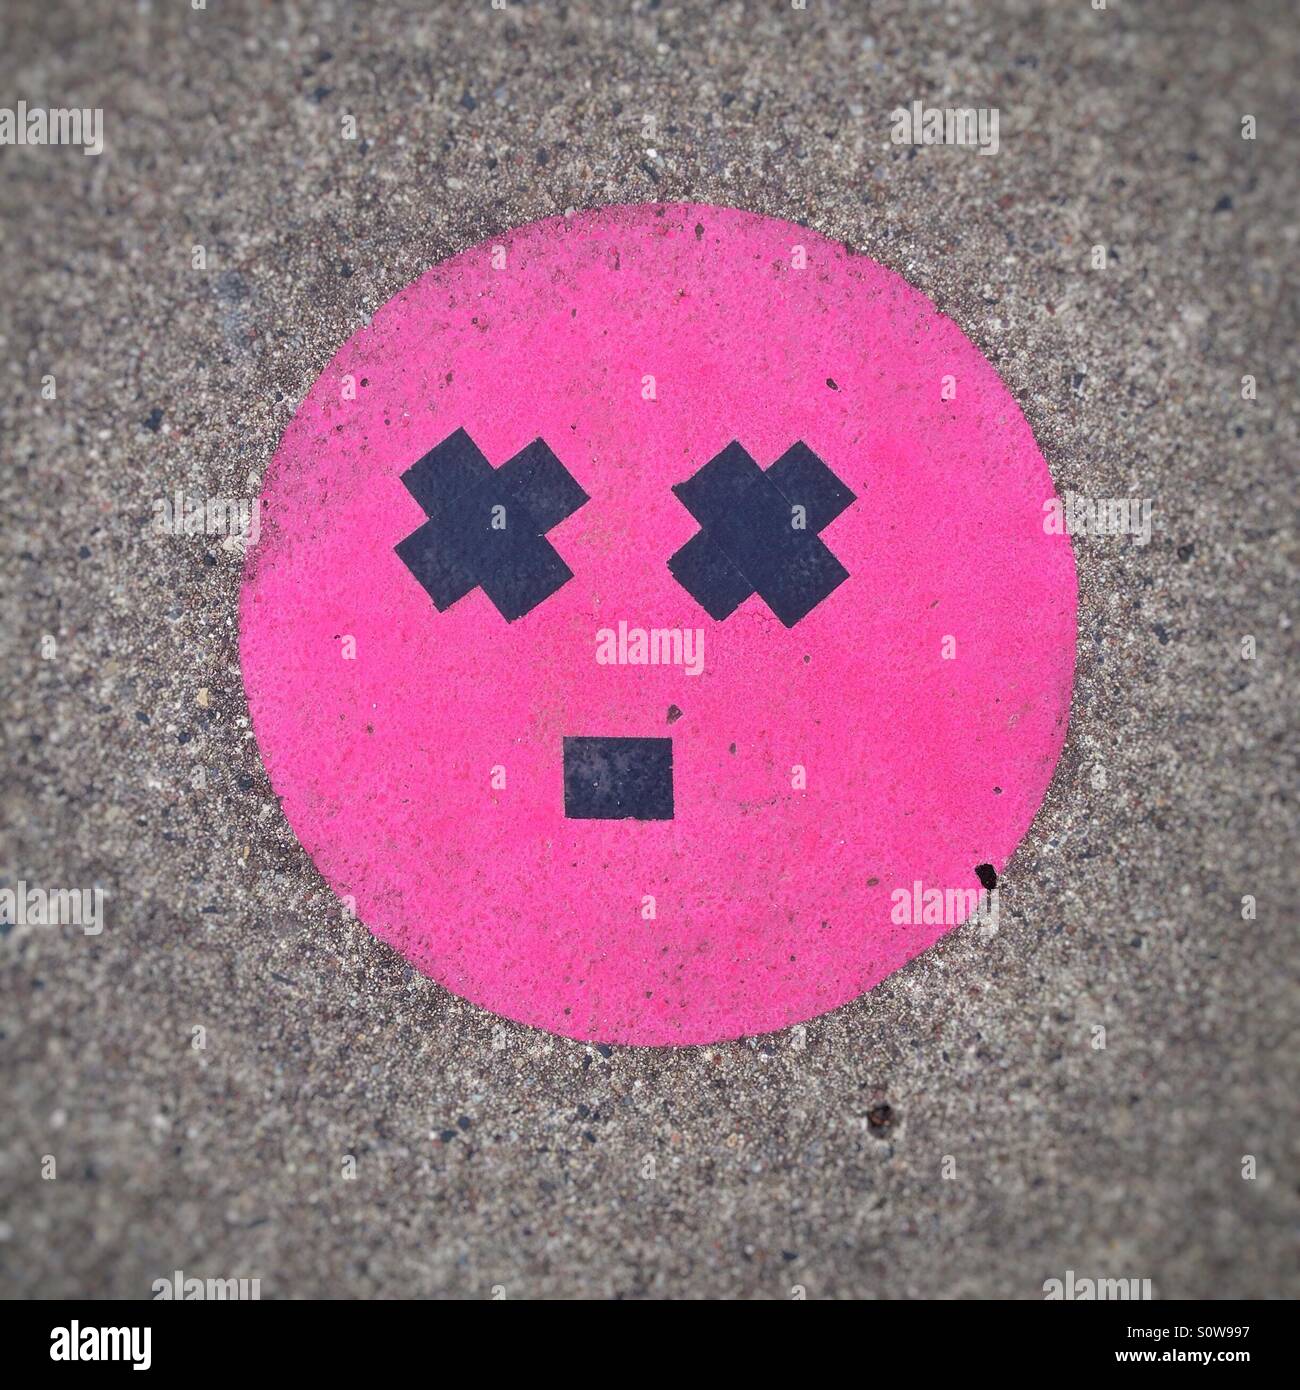 Dizzy or astonished face smiley emoticon or emoji created on the pavement with duct tape Stock Photo